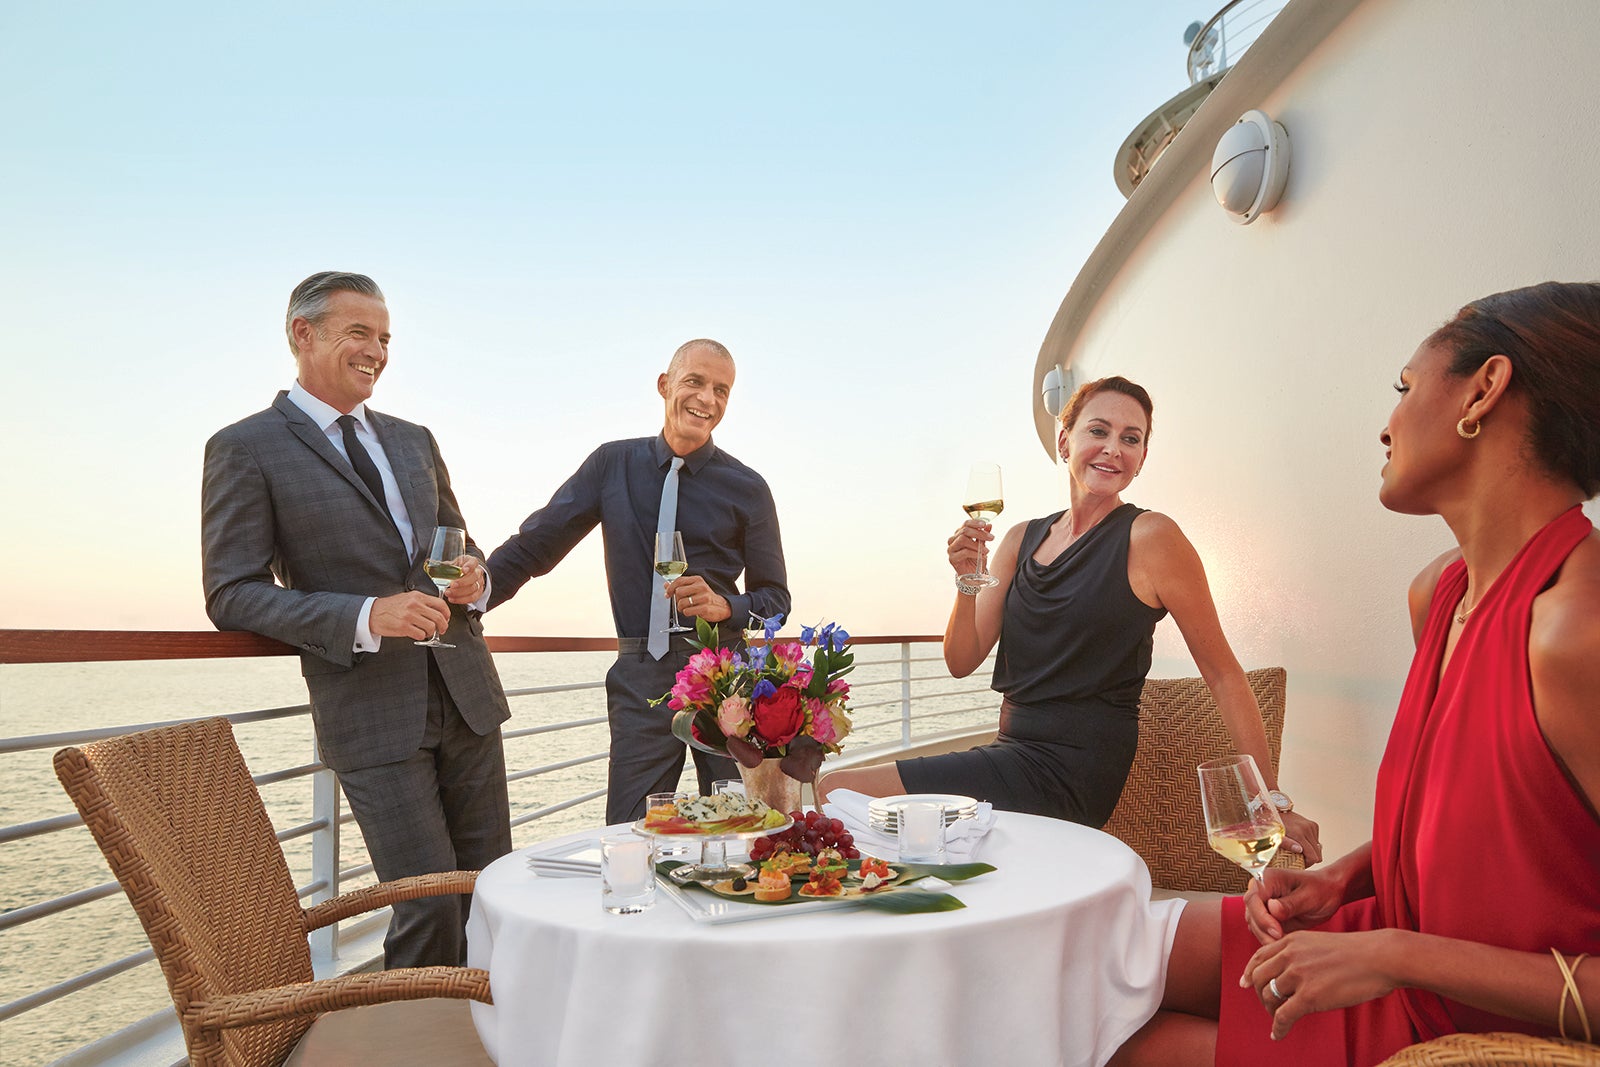 Two couples enjoying drinks on their Seabourn cruise ship balcony